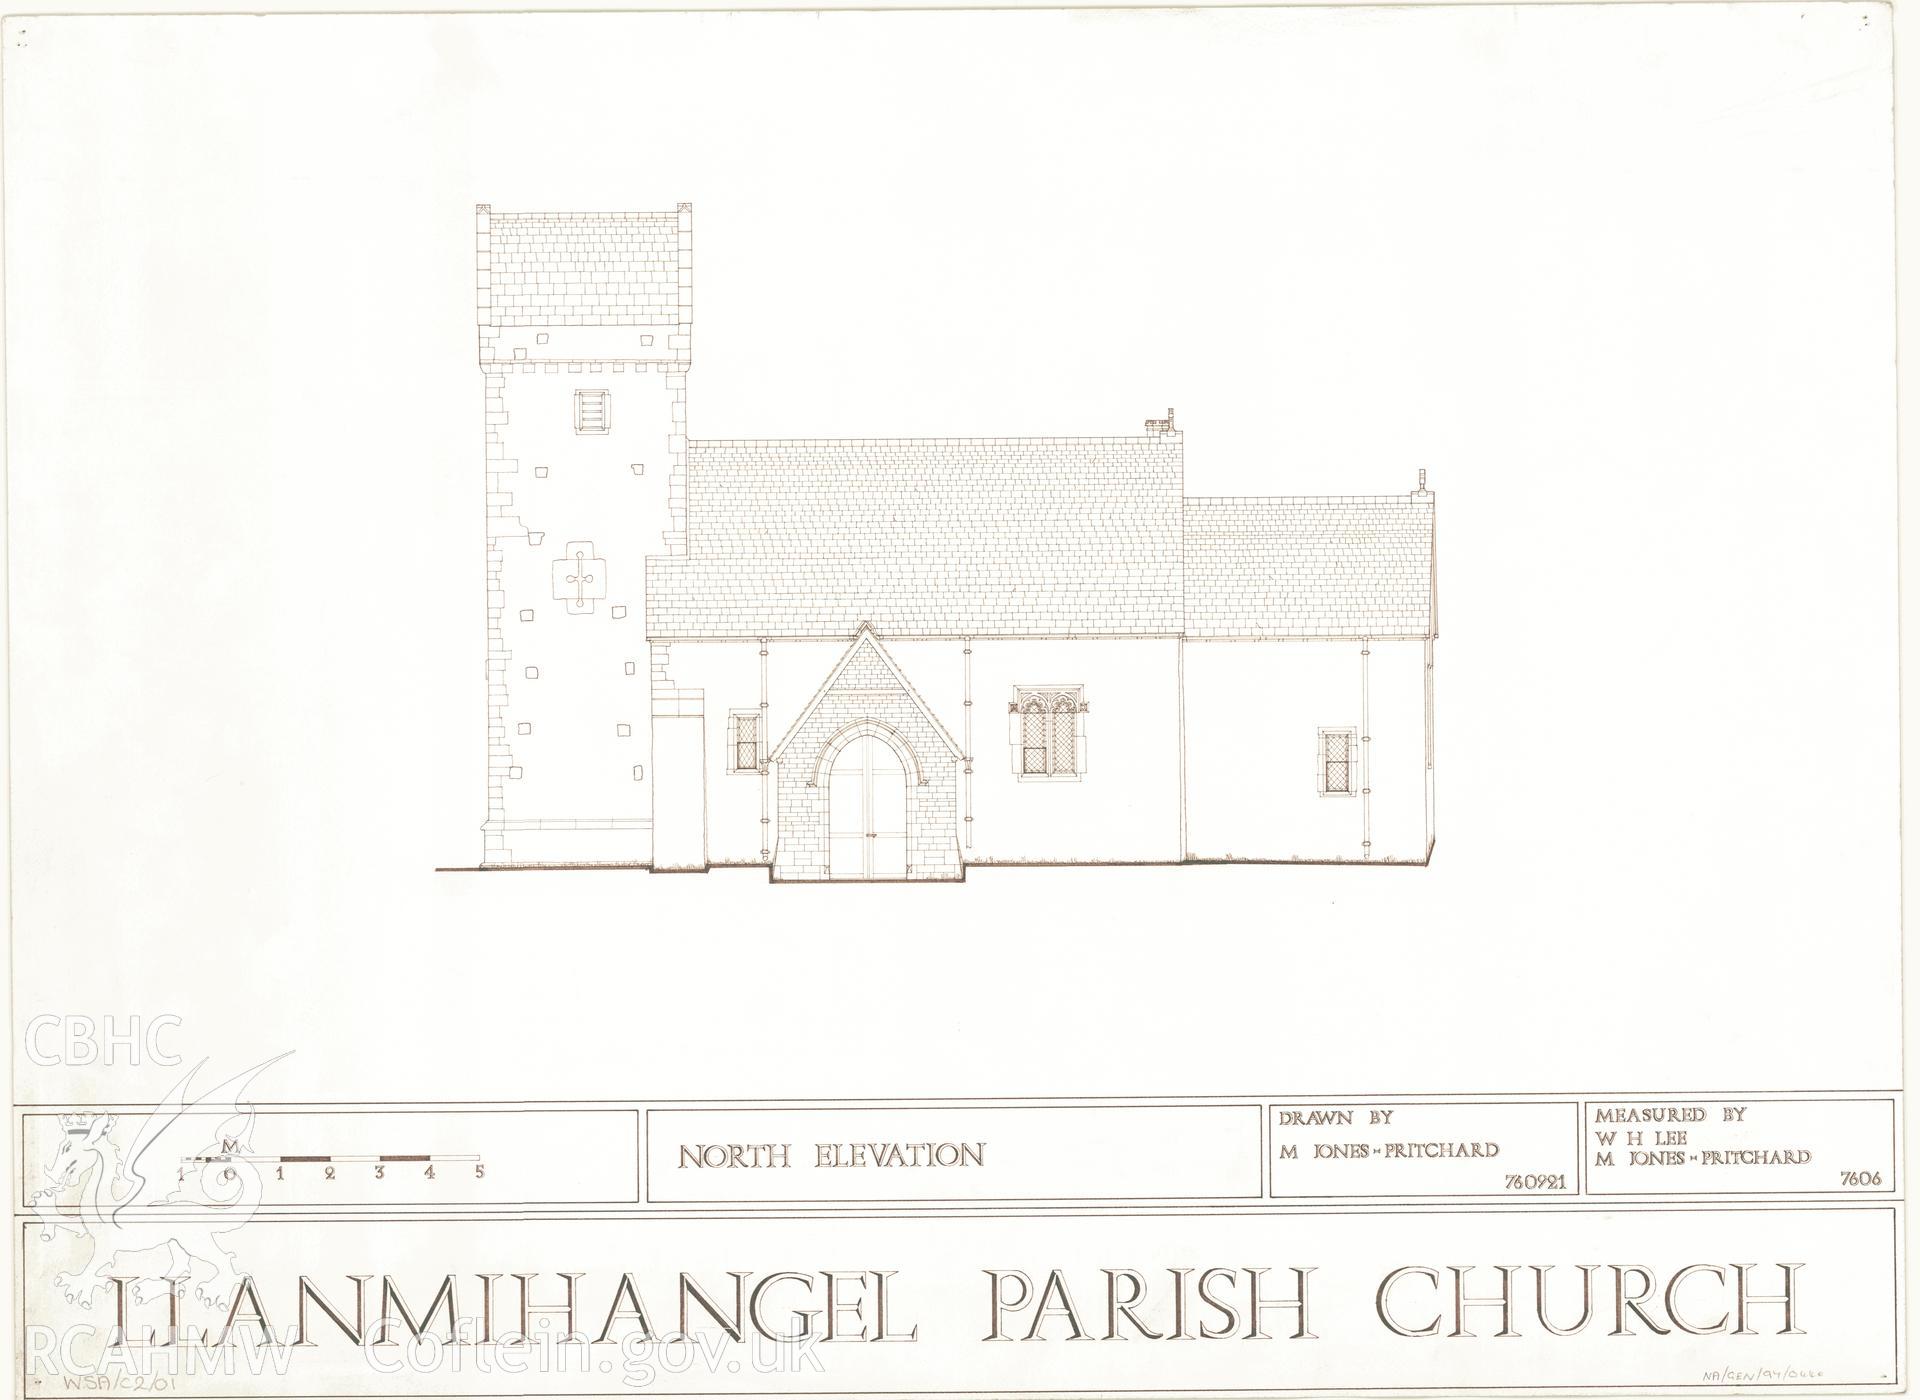 Measured drawing showing north elevation of Llanmihangel Parish Church, produced by M. Jones-Pritchard and W.H. Lee, 1976.